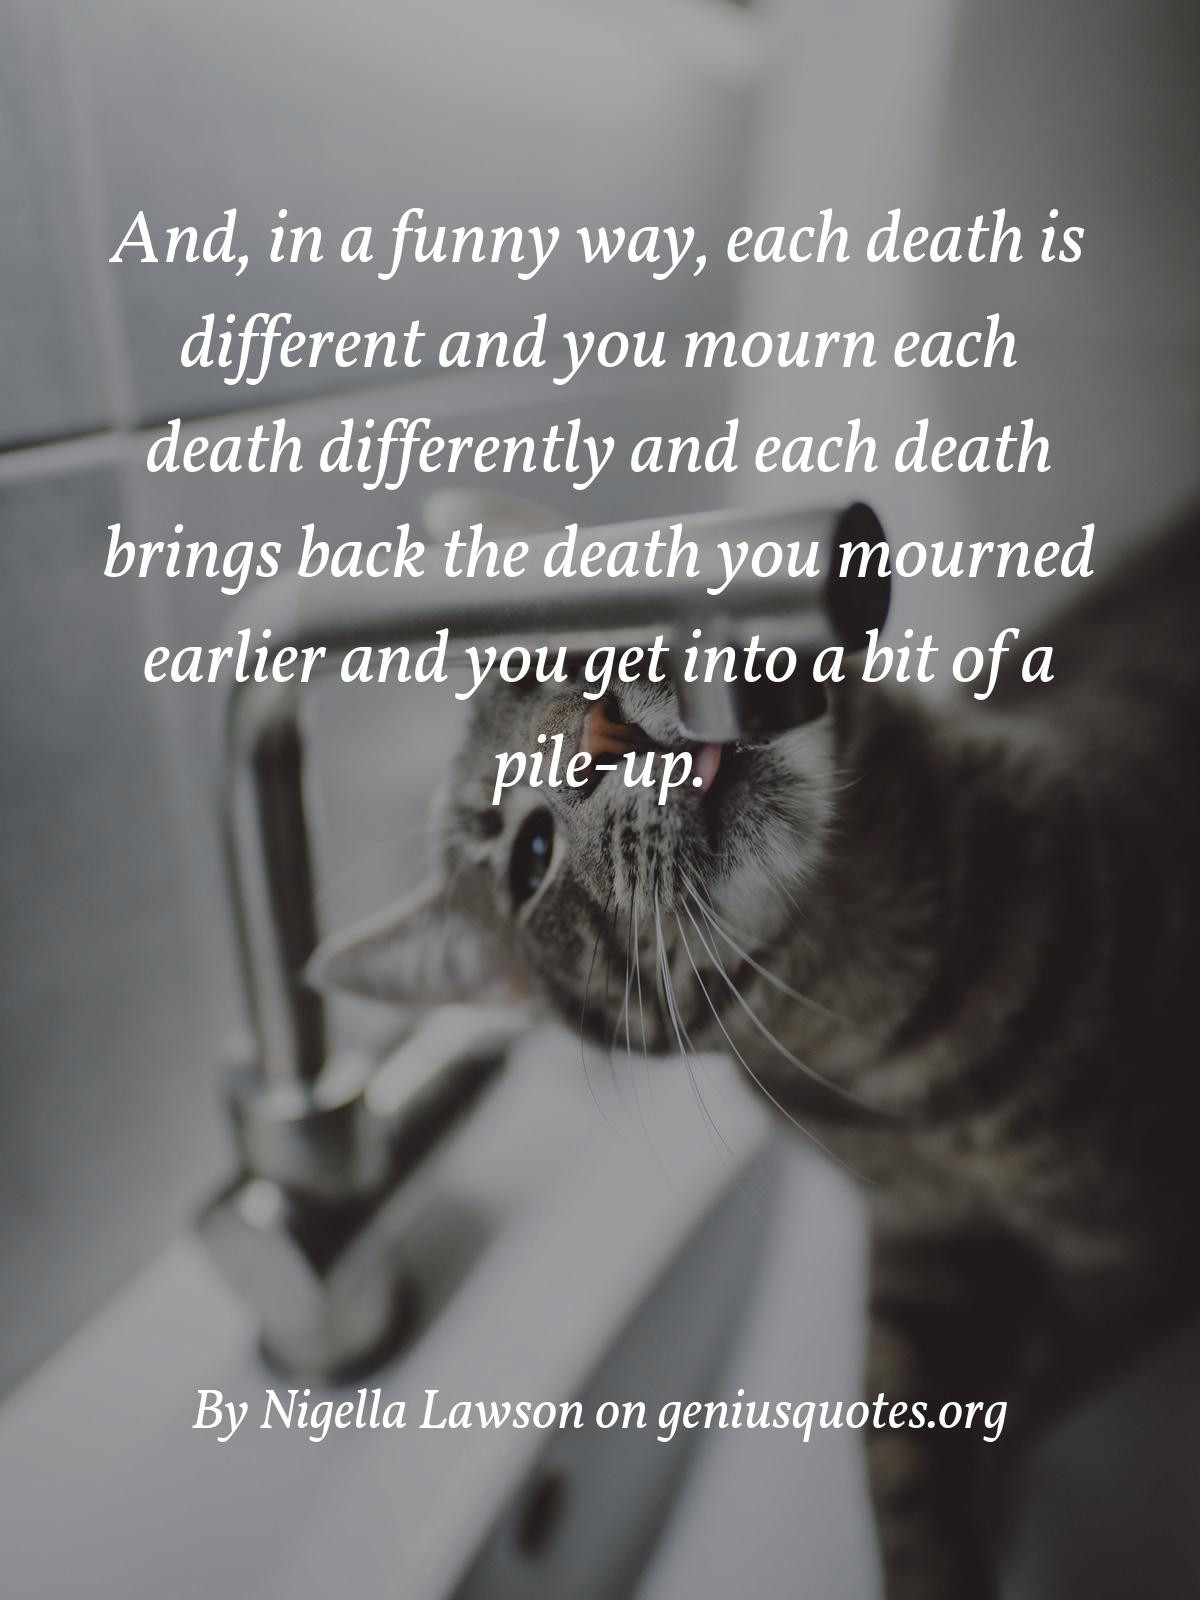 Funny Quotes About Death
 Quote And in a funny way each is different and